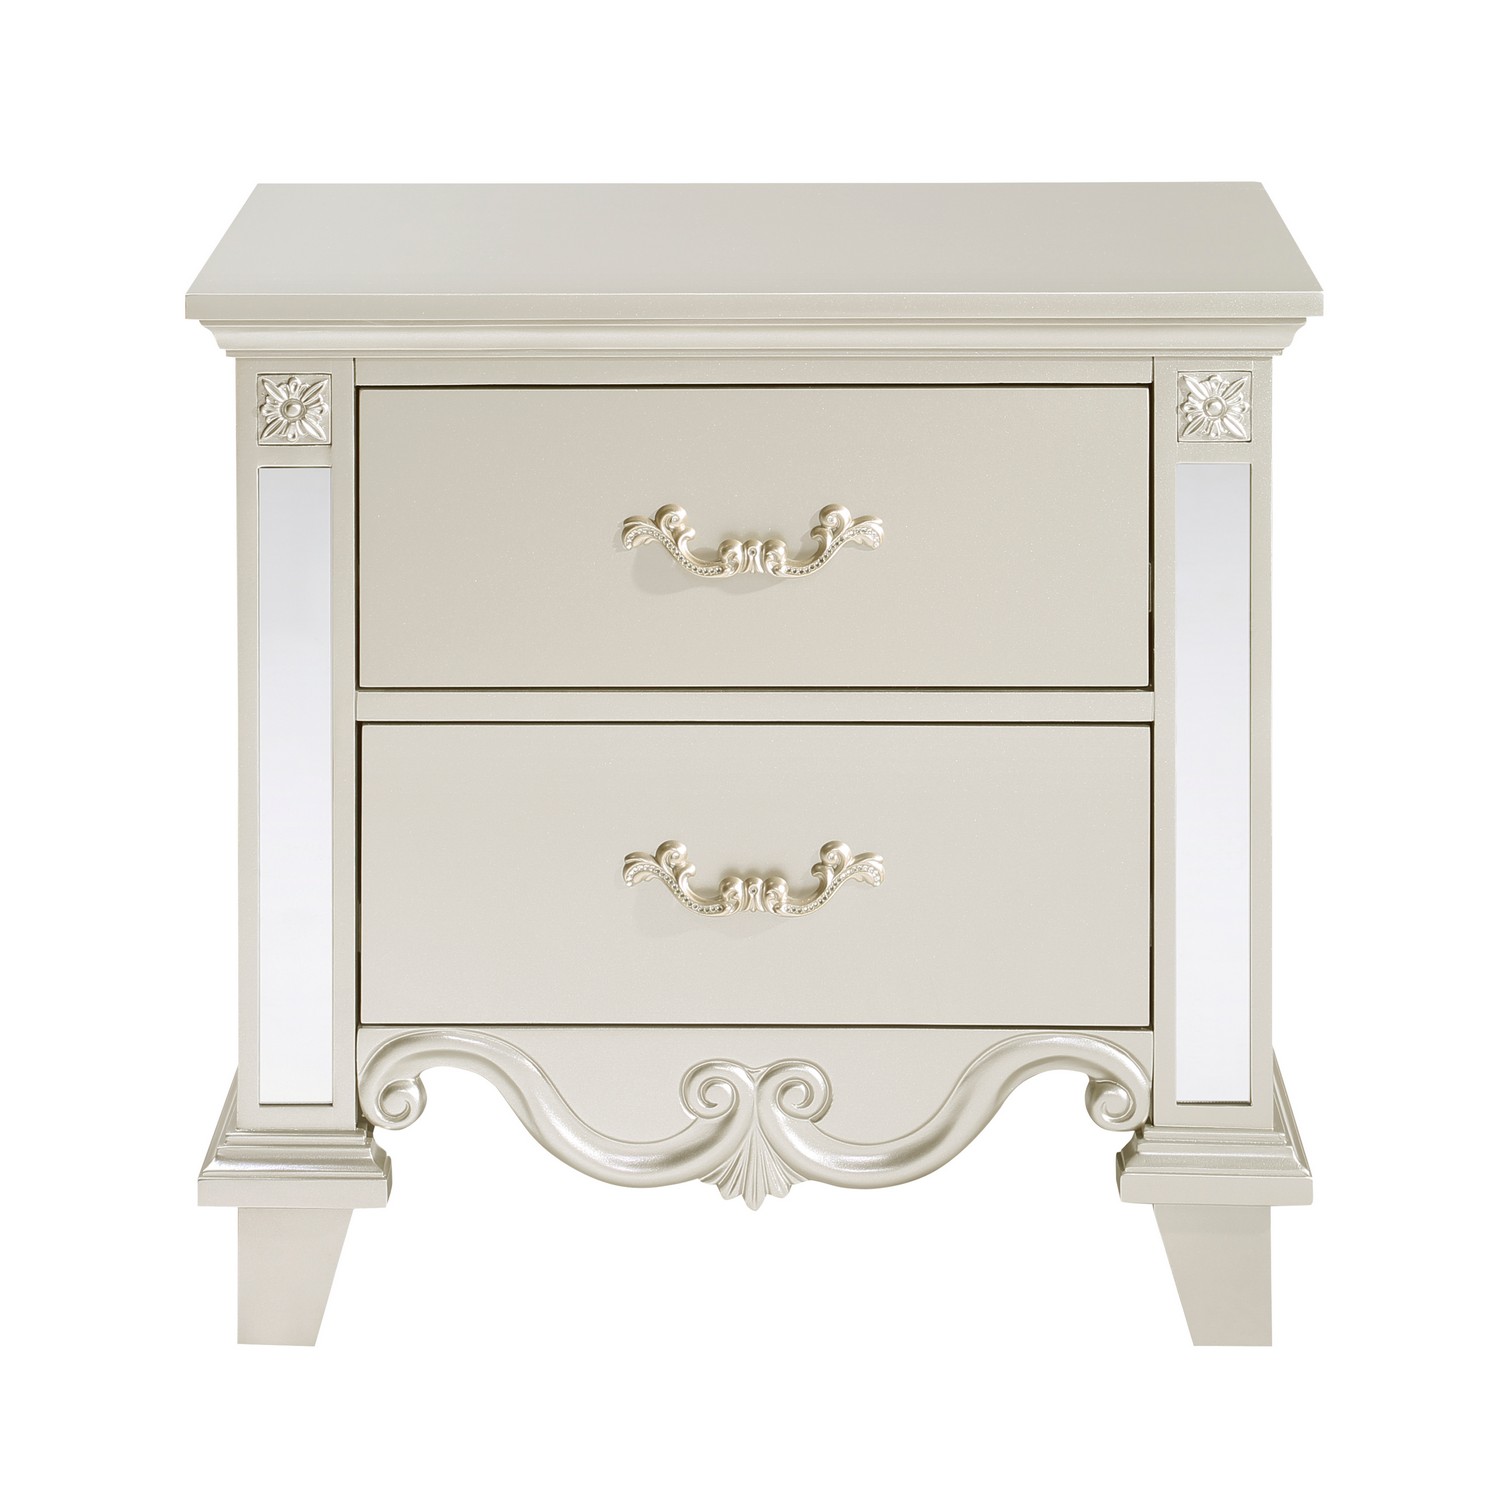 Homelegance Ever Night Stand - Champagne